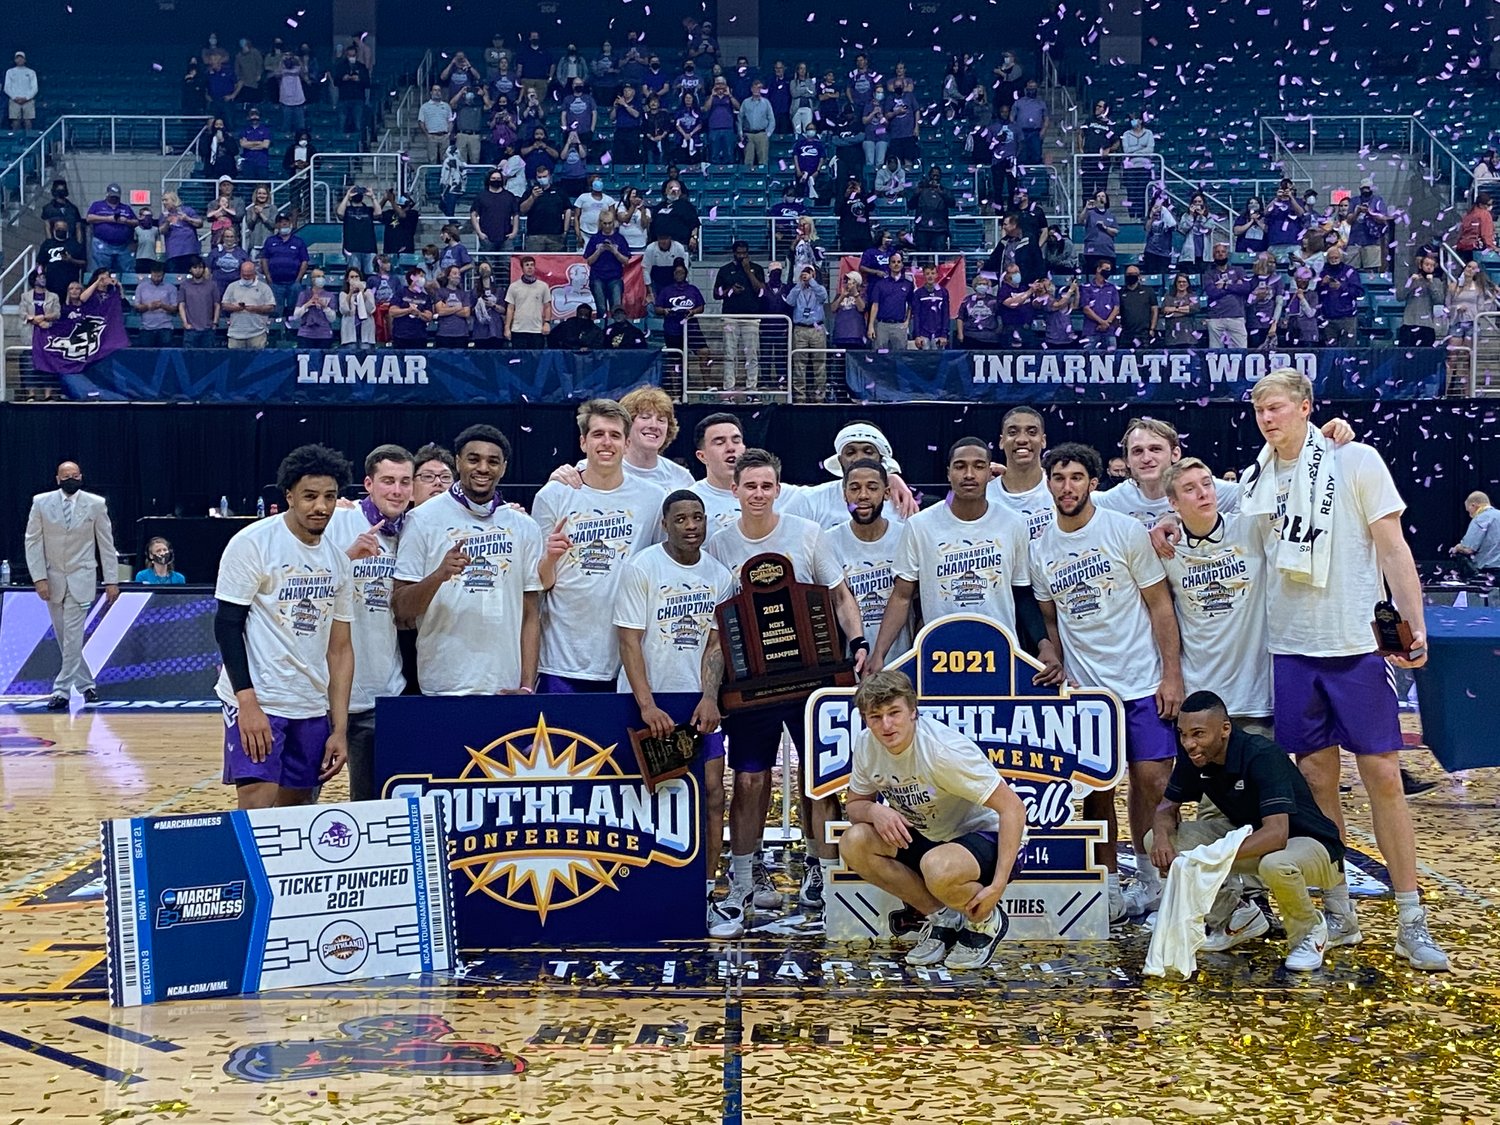 Abilene Christian players pose for a photo after winning the Southland Conference men's basketball tournament for the second straight season on Saturday, March 13, at the Merrell Center